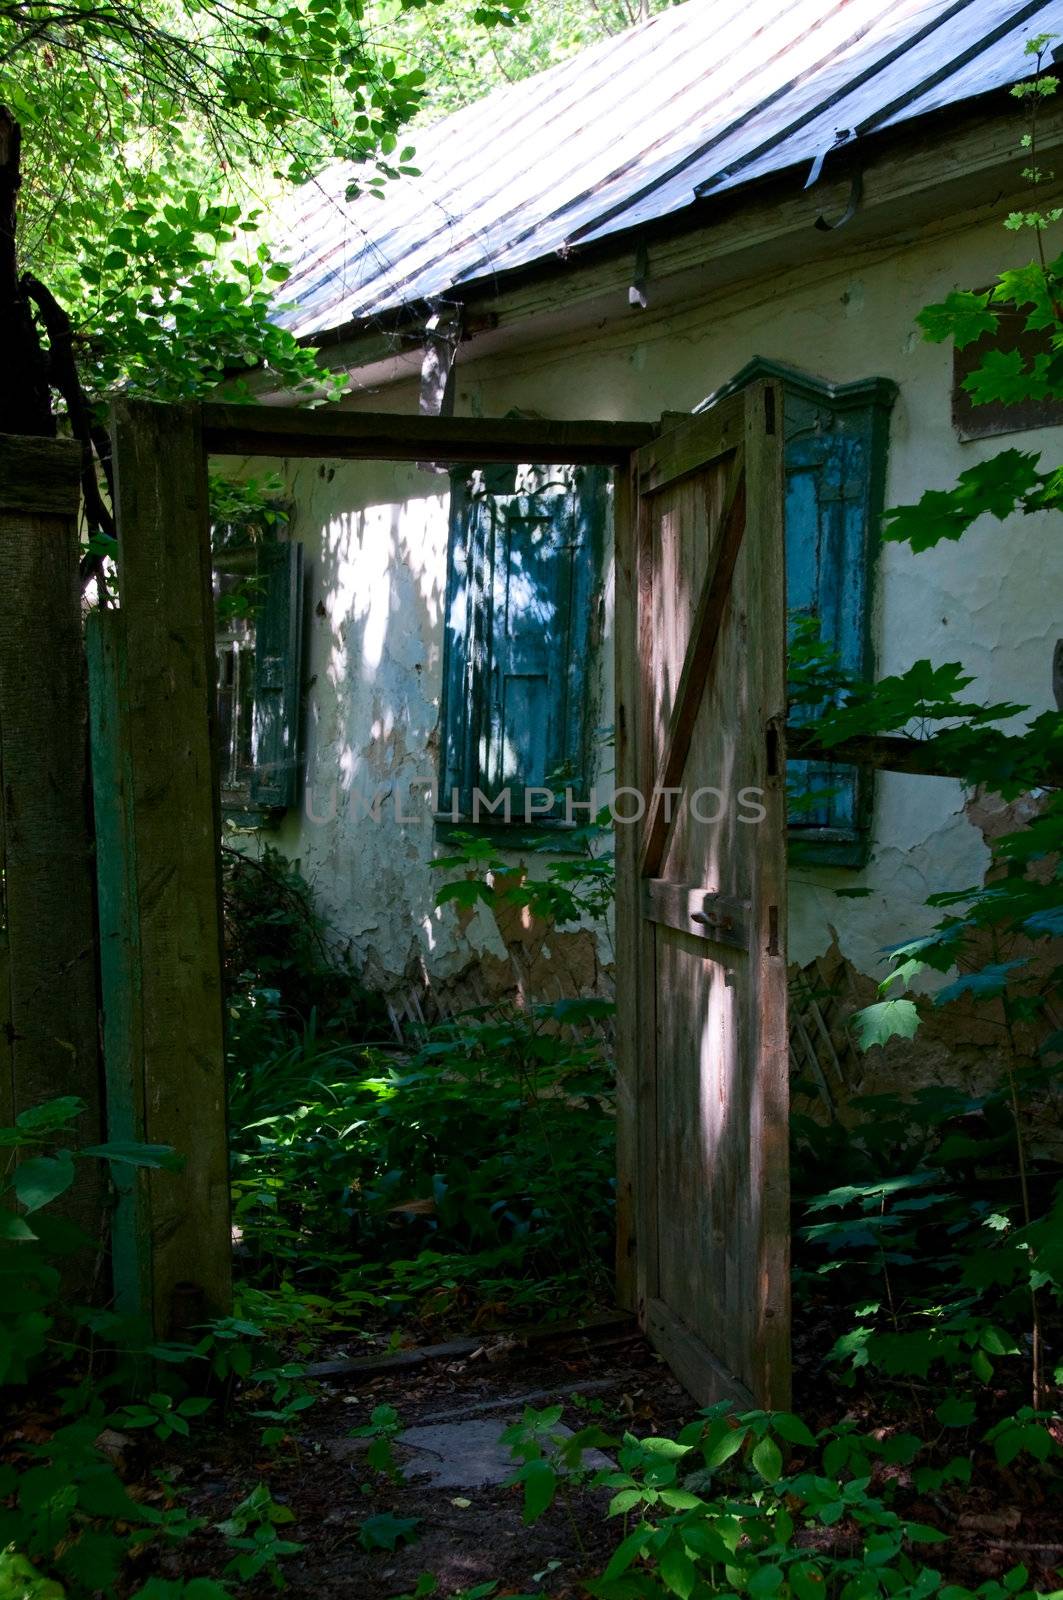 Chernobyl disaster results. This is an abandoned house in Chernobyl city